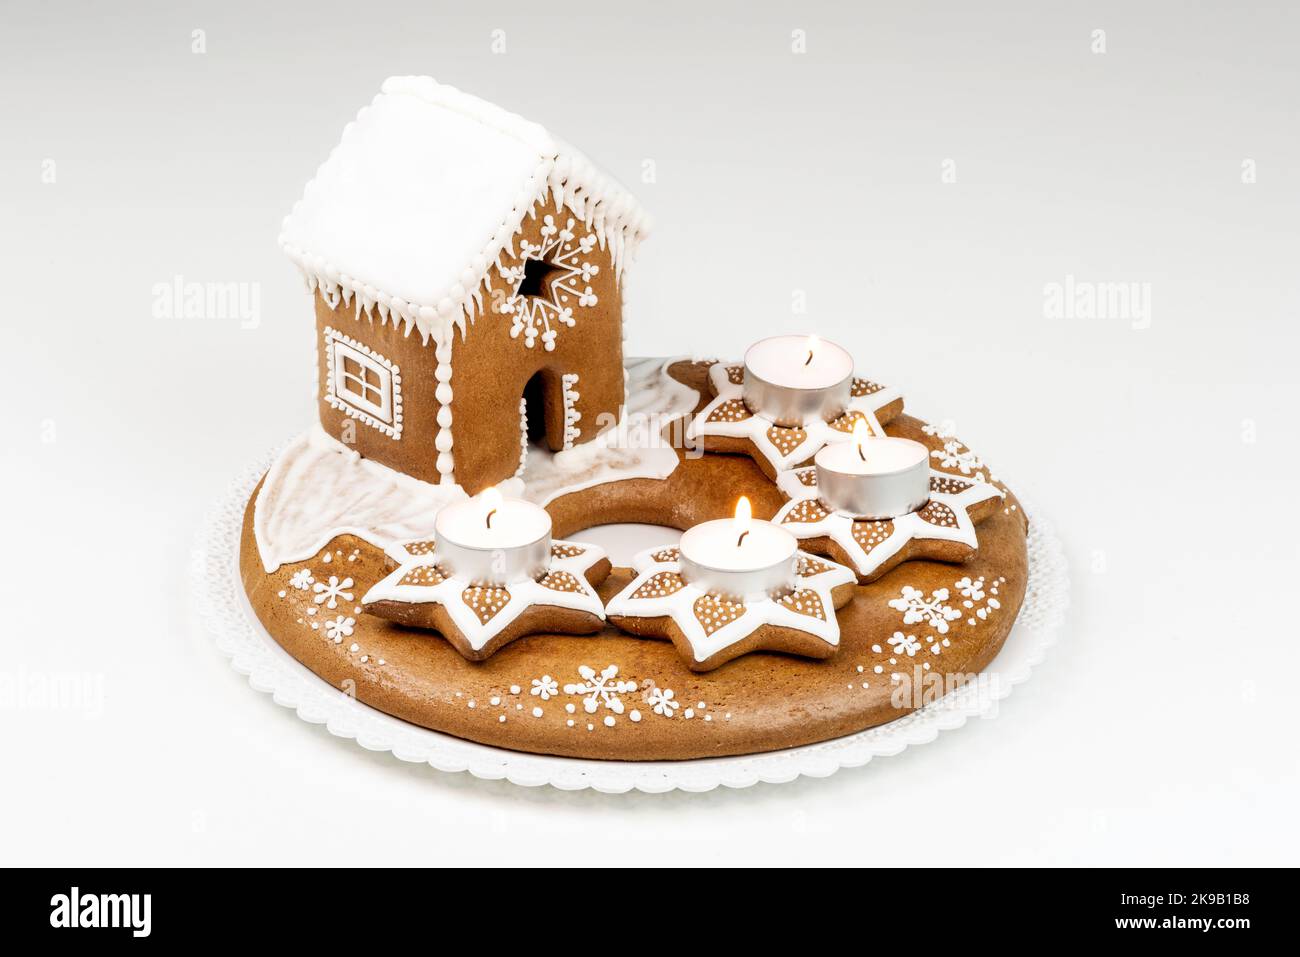 Isolated advent candlestick with four lighted candles and christmas homemade gingerbread house on white background Stock Photo